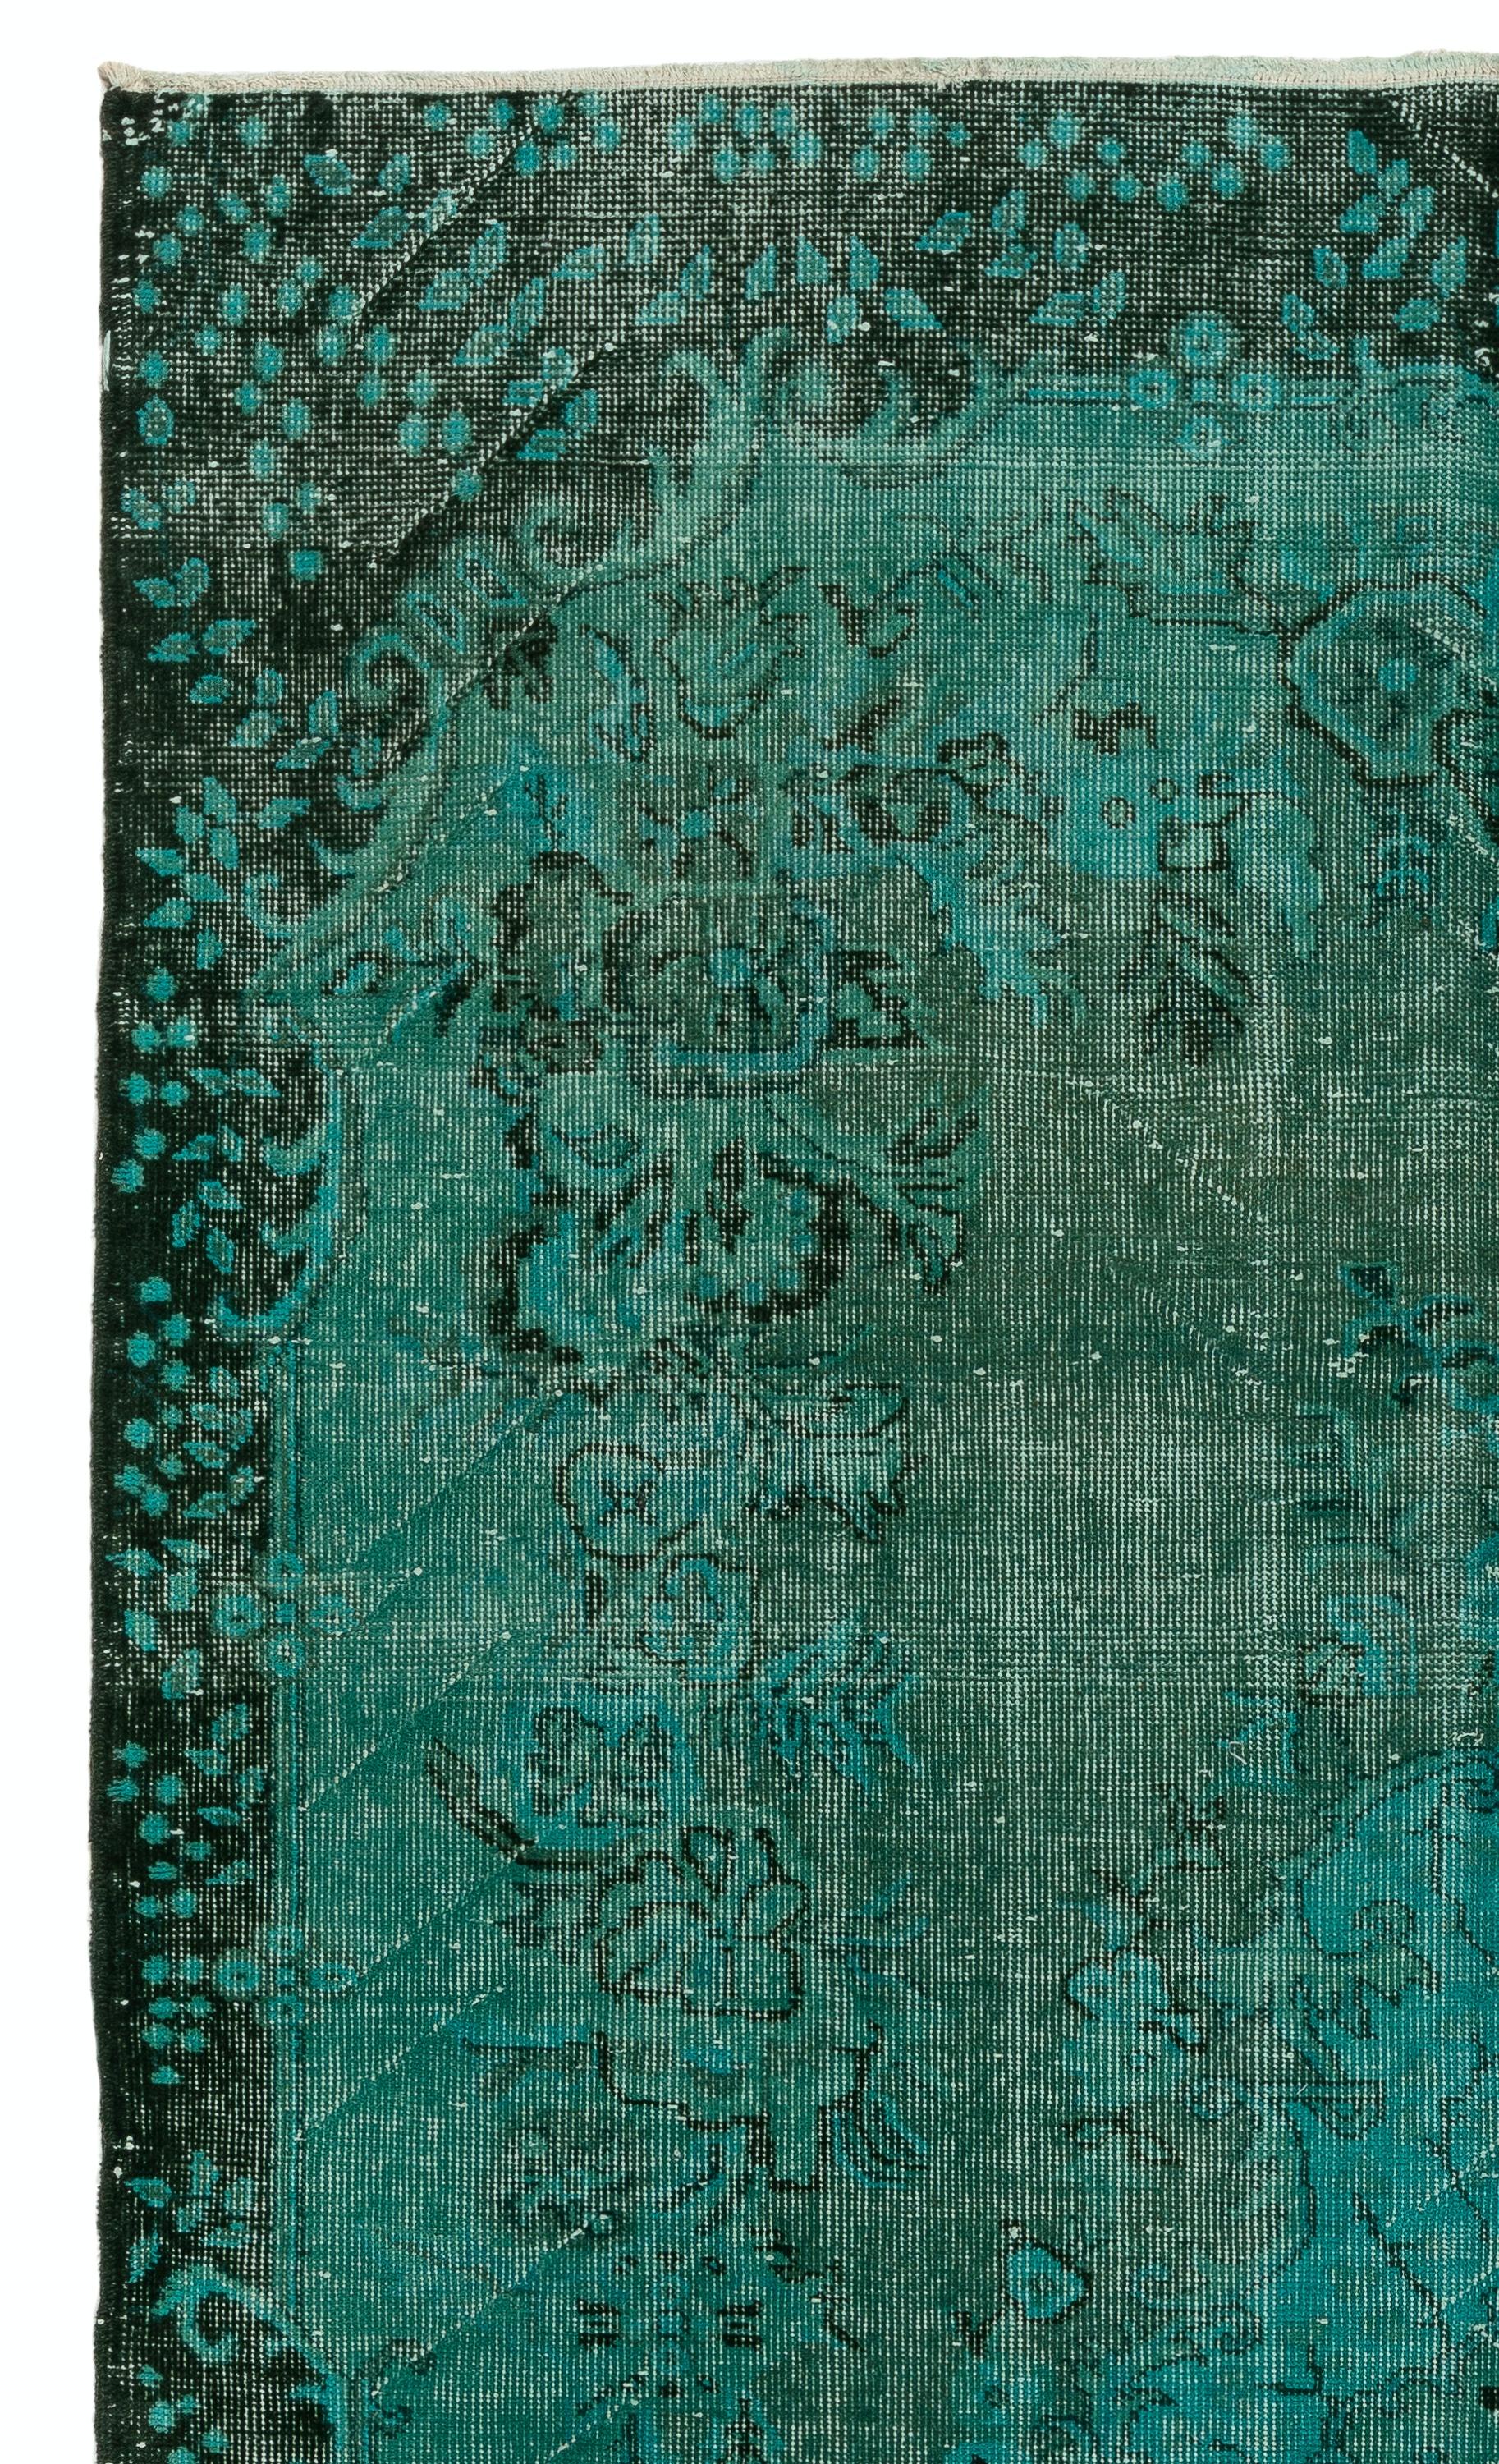 A vintage Turkish rug re-dyed in teal color.
Finely hand knotted, low wool pile on cotton foundation. Deep washed.
Sturdy and can be used on a high traffic area, suitable for both residential and commercial interiors. Measures: 5.6 x 9 Ft.